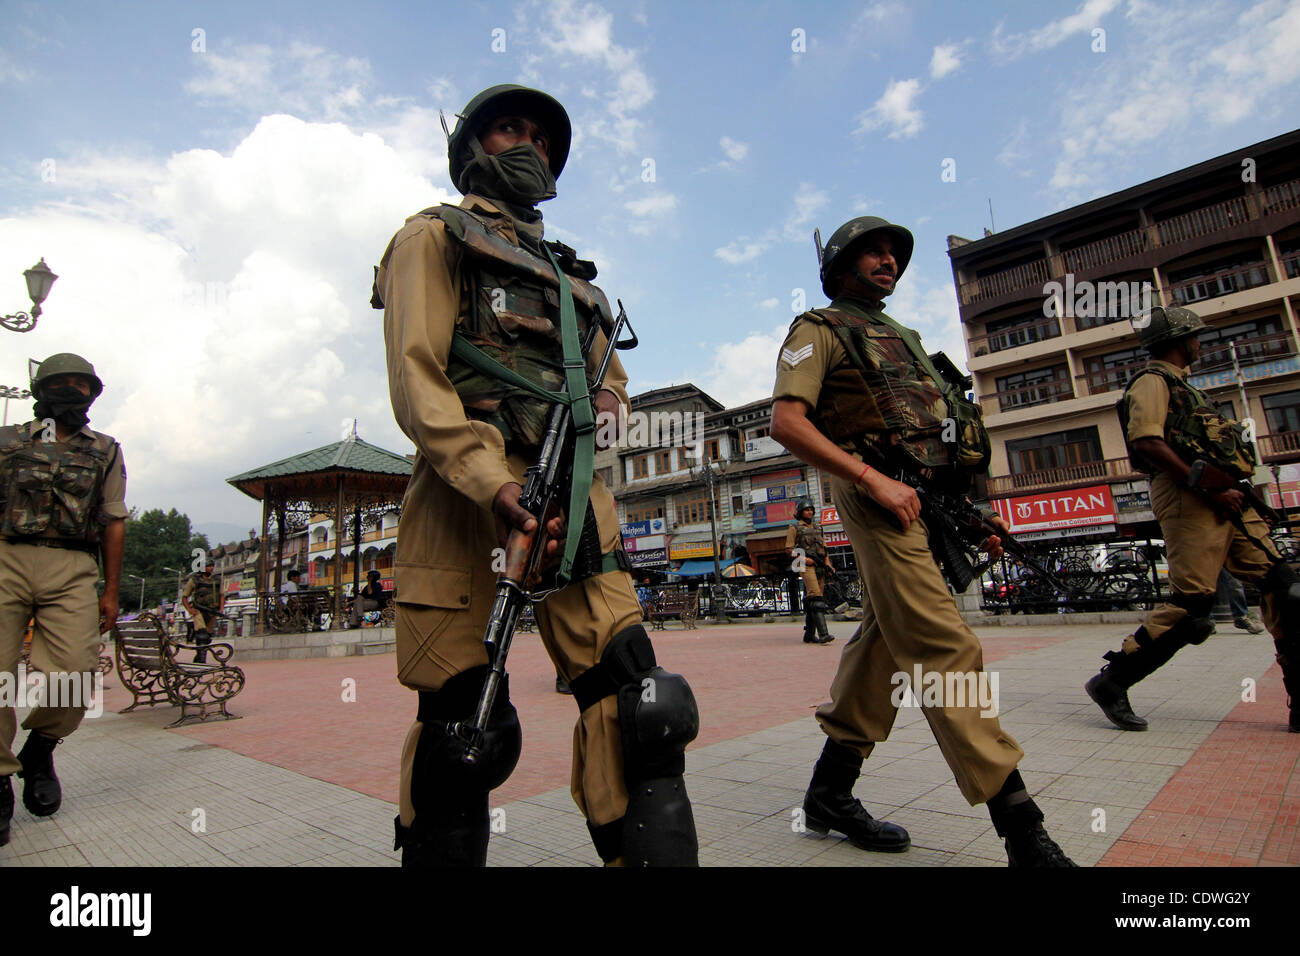 Jul 02, 2011 - Srinagar, Kashmir, India - Indian soldiers petroling during  a surprise raid on the main market in central Srinagar, the summer capital  of Jammu Kashmir. India and Pakistan have